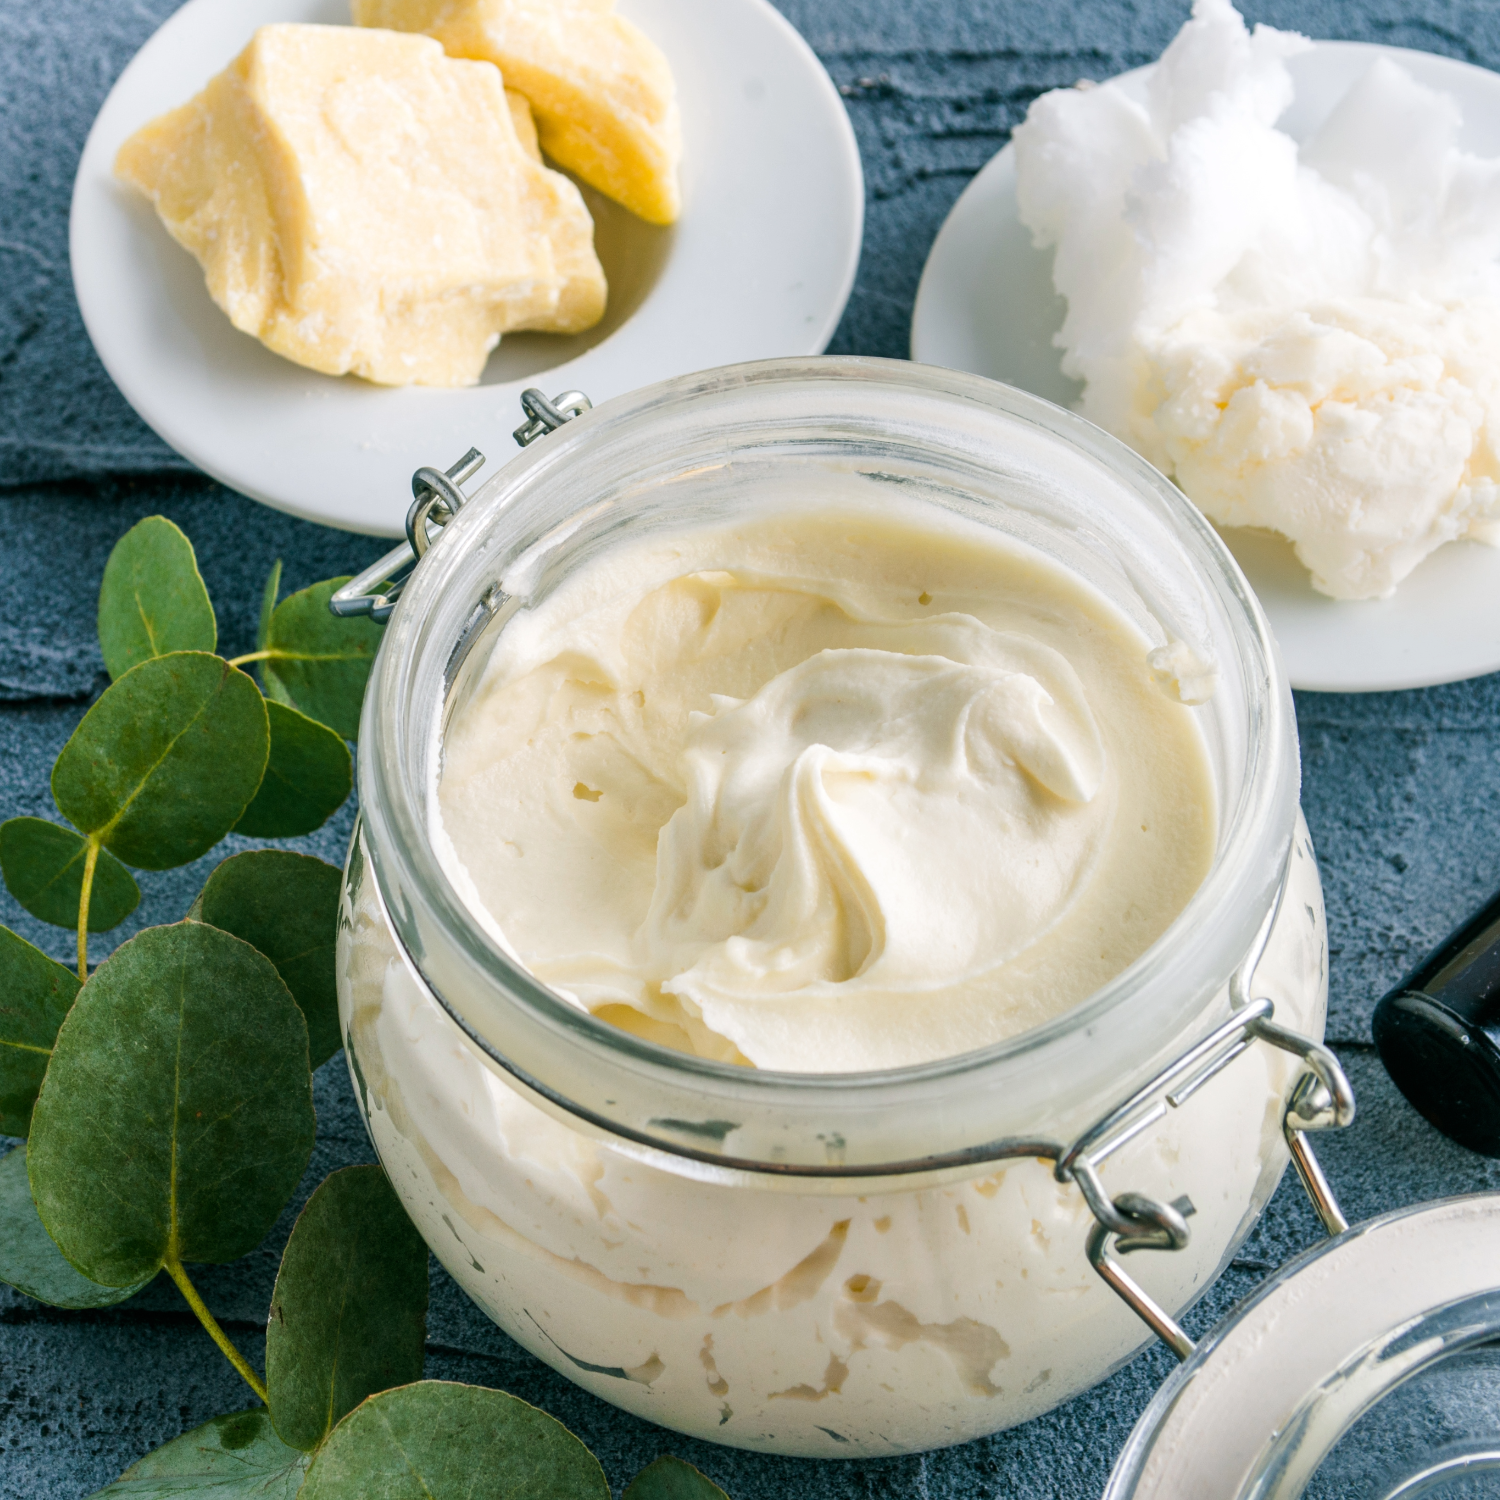 Whipped Body Butter and Body Scrub Class